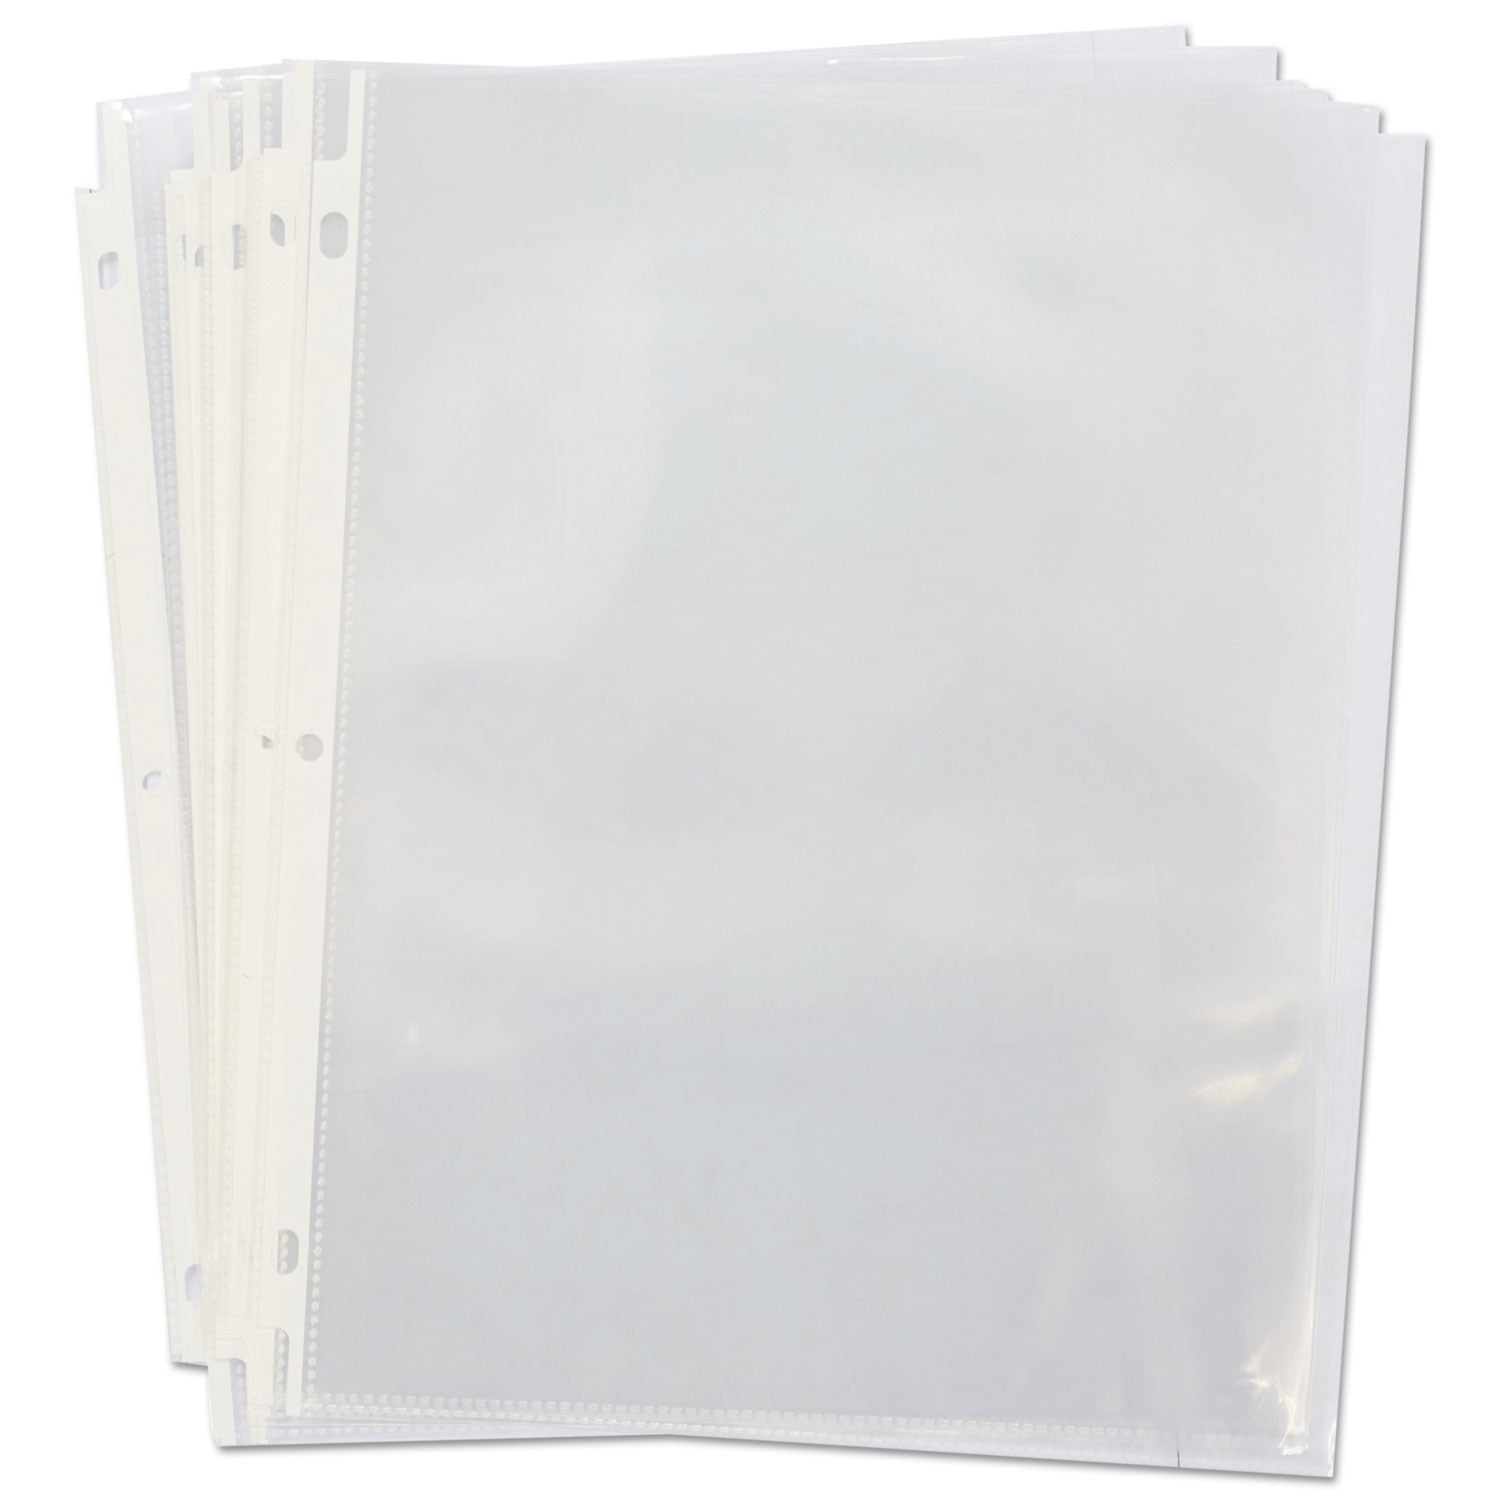 standard-sheet-protector-economy-85-x-11-clear-200-box_unv21123 - 2